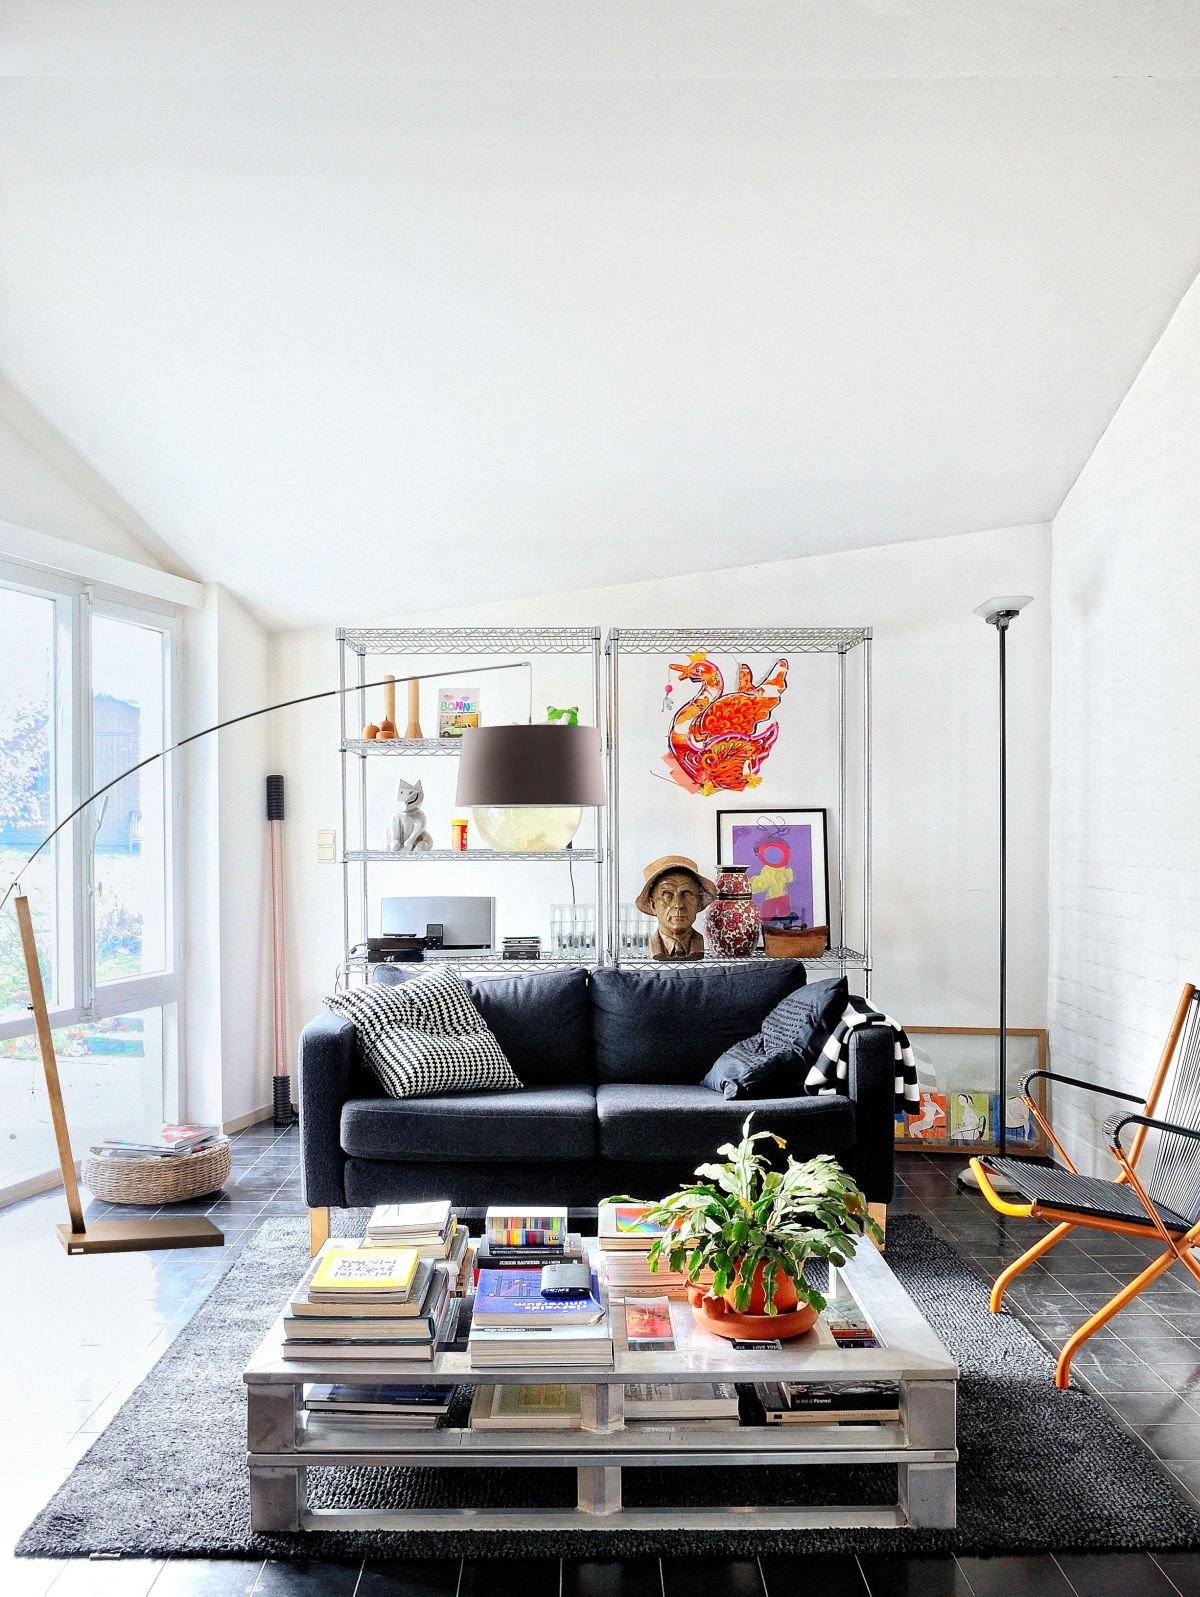 Living Room Arc Floor Lamps
 The Many Stylish Forms The Modern Arc Floor Lamp